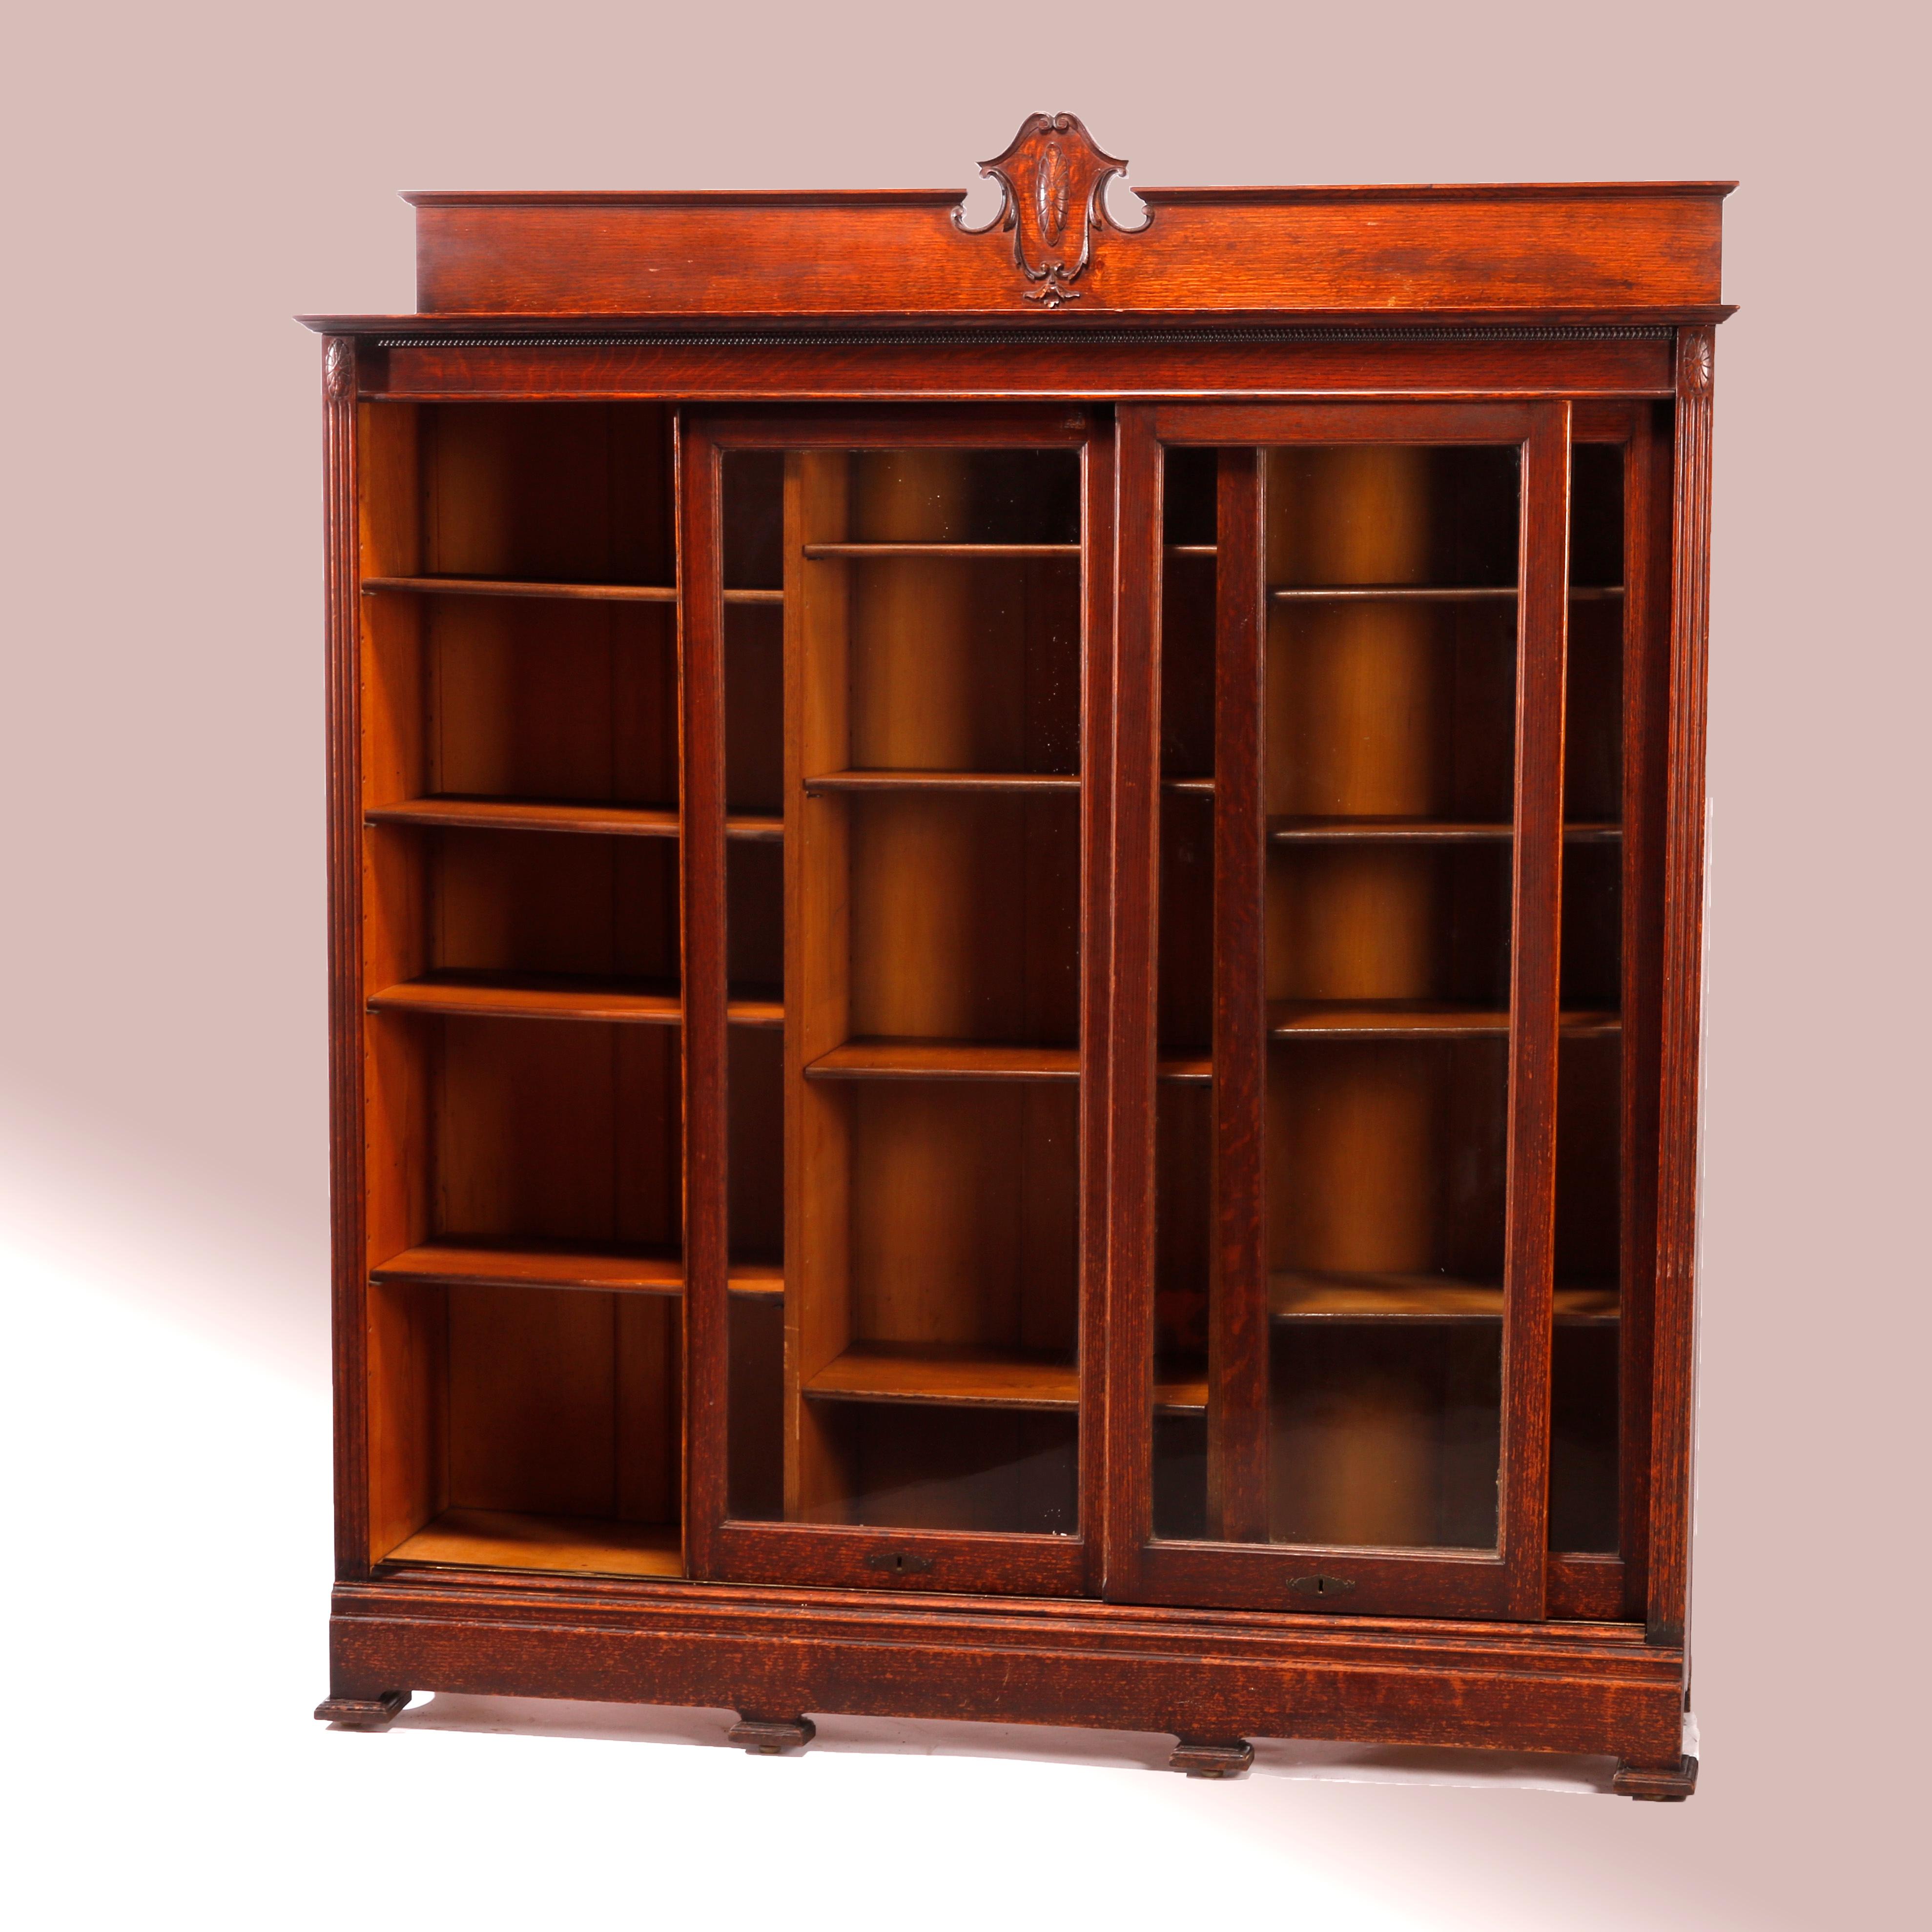 An antique Arts & Crafts bookcase offers quarter sawn oak construction with upper having backsplash with carved shield form crest over triple sliding glass door opening to adjustable shelf divided interior, raised on square feet, c1910

Measures -